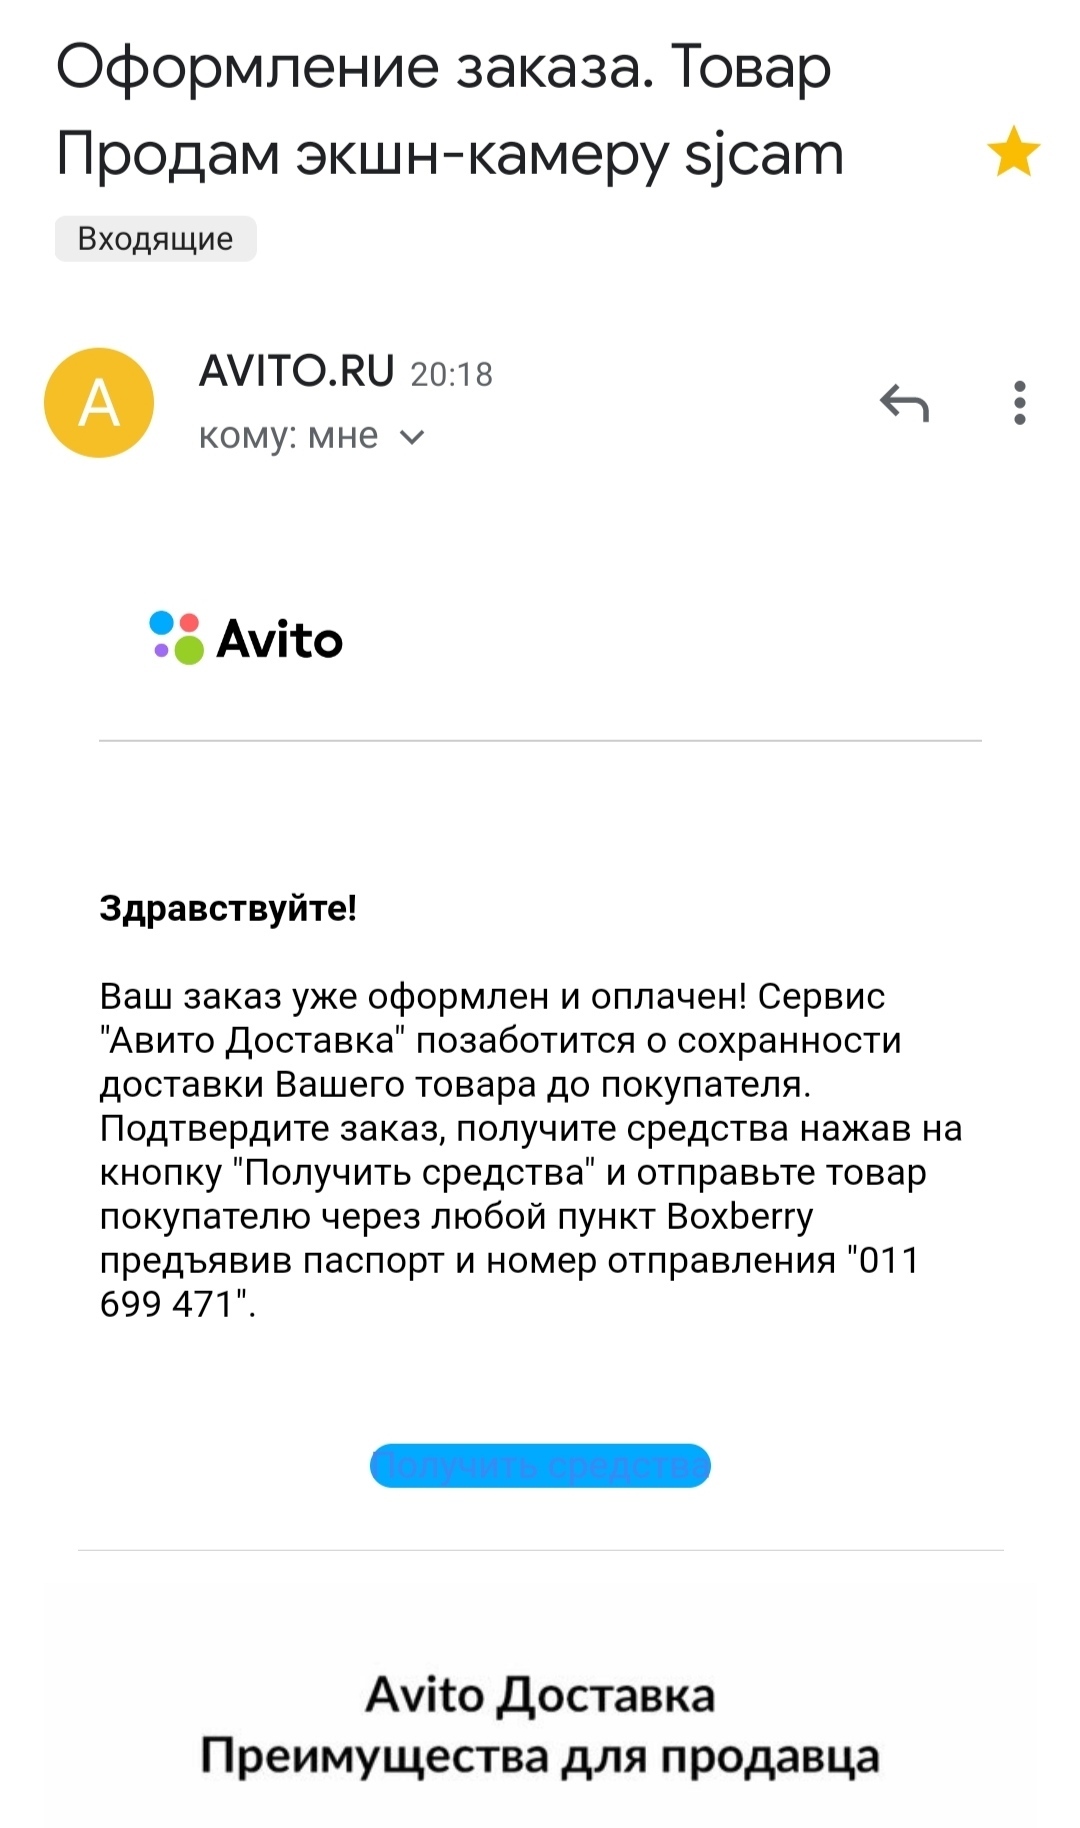 Divorce from Avito. How to avoid falling for scammers? Very simple - don’t mess with Avito delivery - Avito, Delivery, Longpost, Correspondence, Screenshot